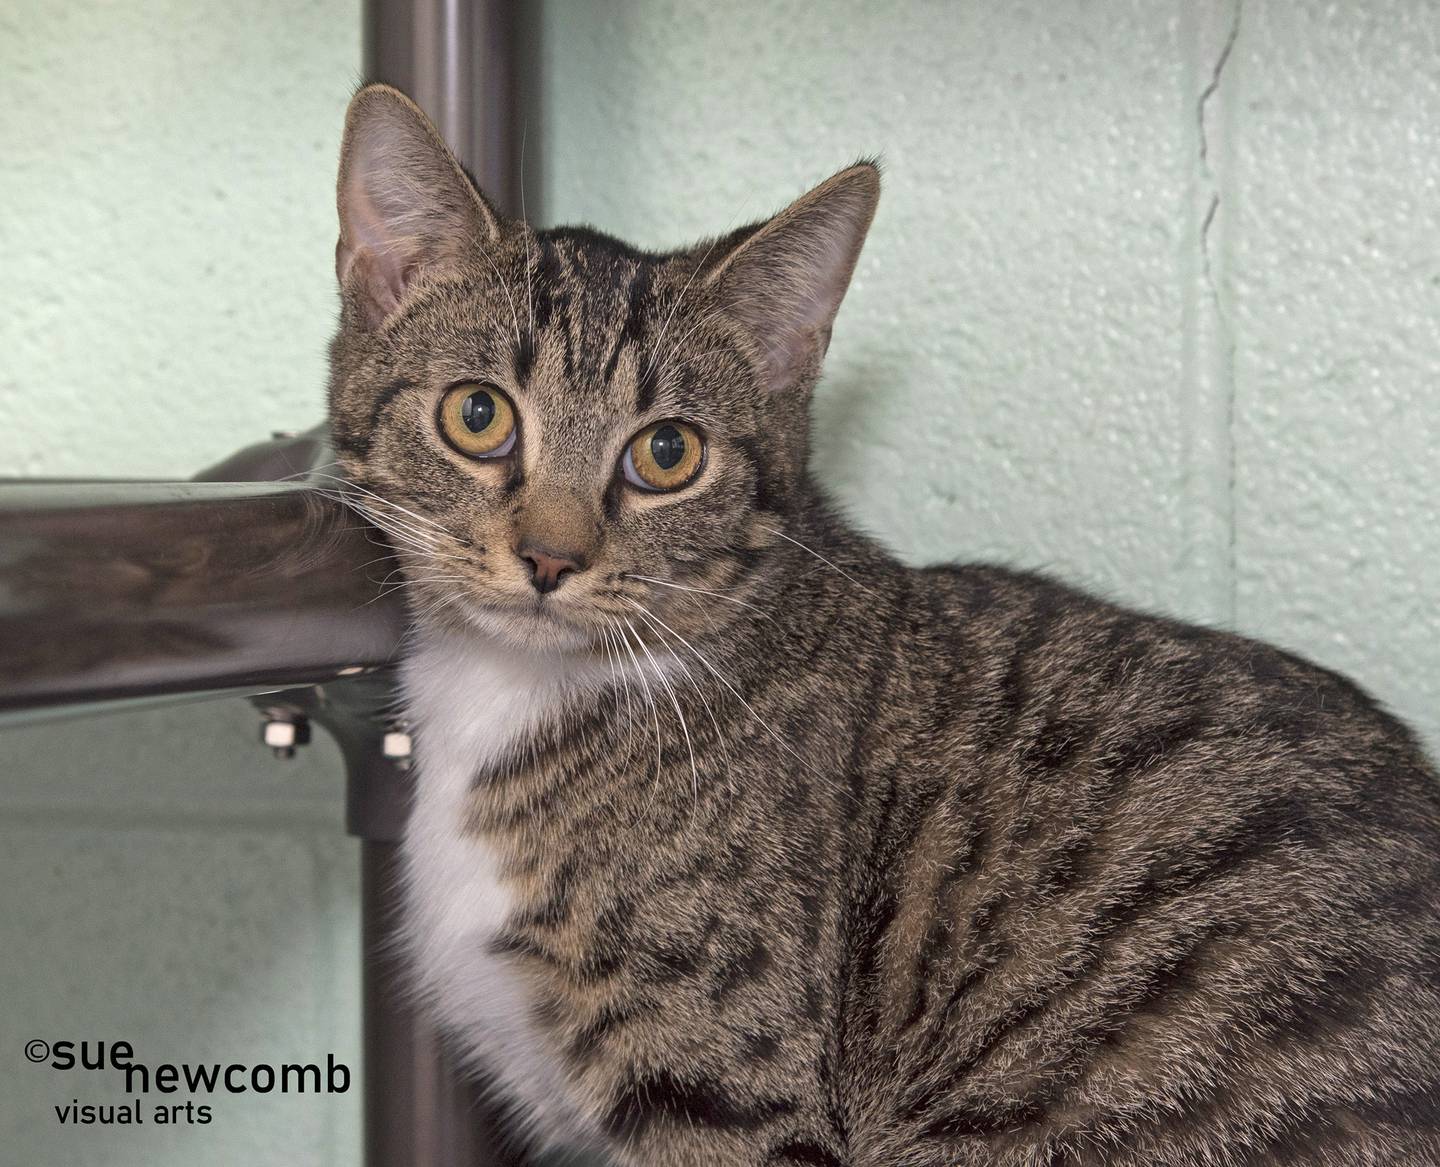 Sienna is a 1-year-old domestic shorthair who was left at the shelter. She needs a forever family to give her plenty of love. Contact the Will County Humane Society at willcountyhumane.com and follow the instructions for the adoption process.